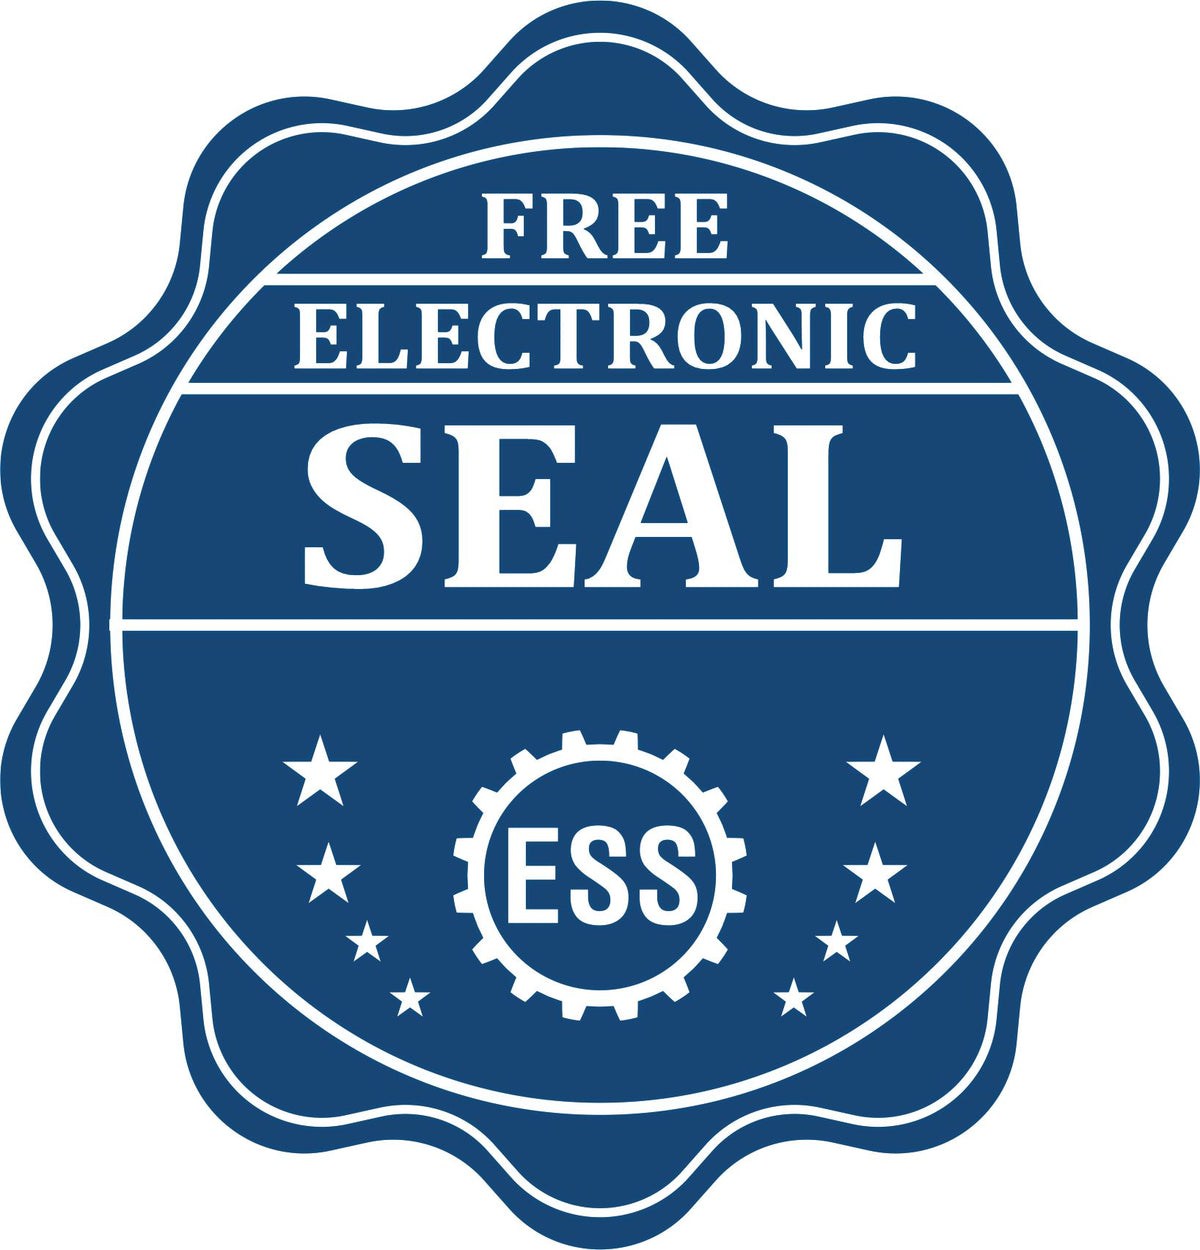 A badge showing a free electronic seal for the Long Reach Nebraska PE Seal with stars and the ESS gear on the emblem.